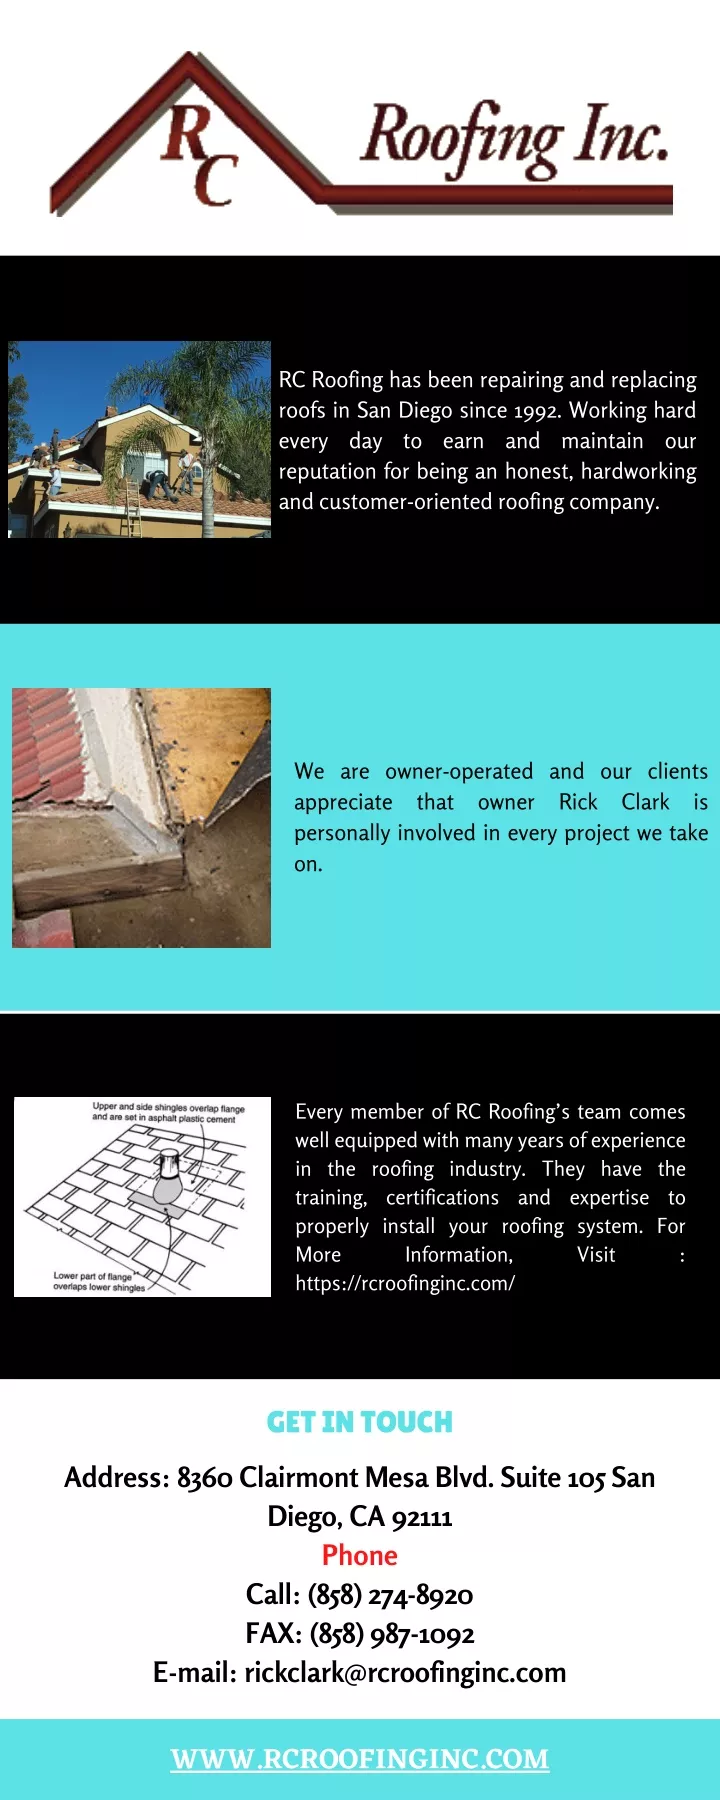 rc roofing has been repairing and replacing roofs